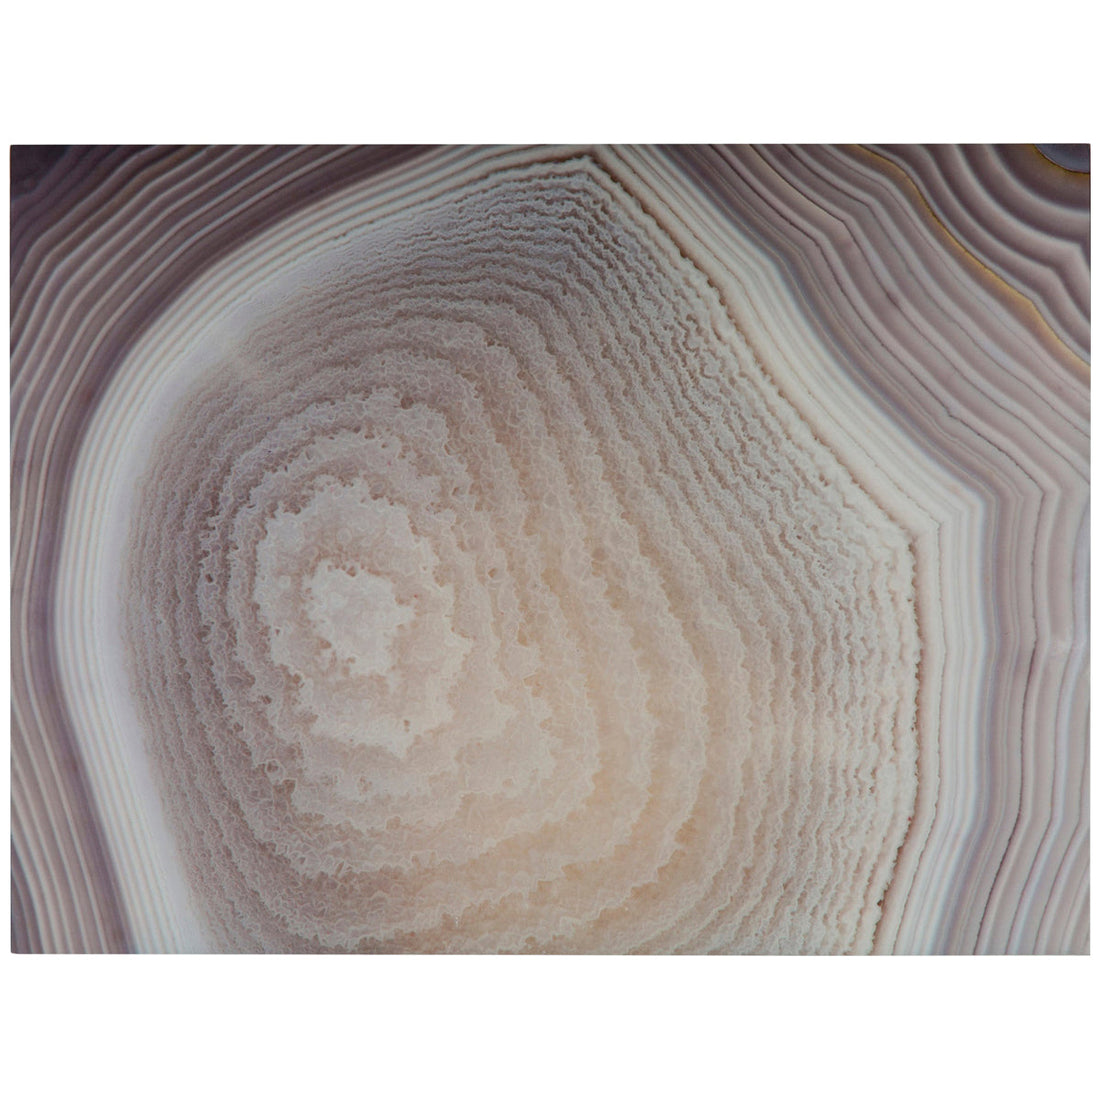 Coup & Co Neutral Agate Art Print on Glass - Style D